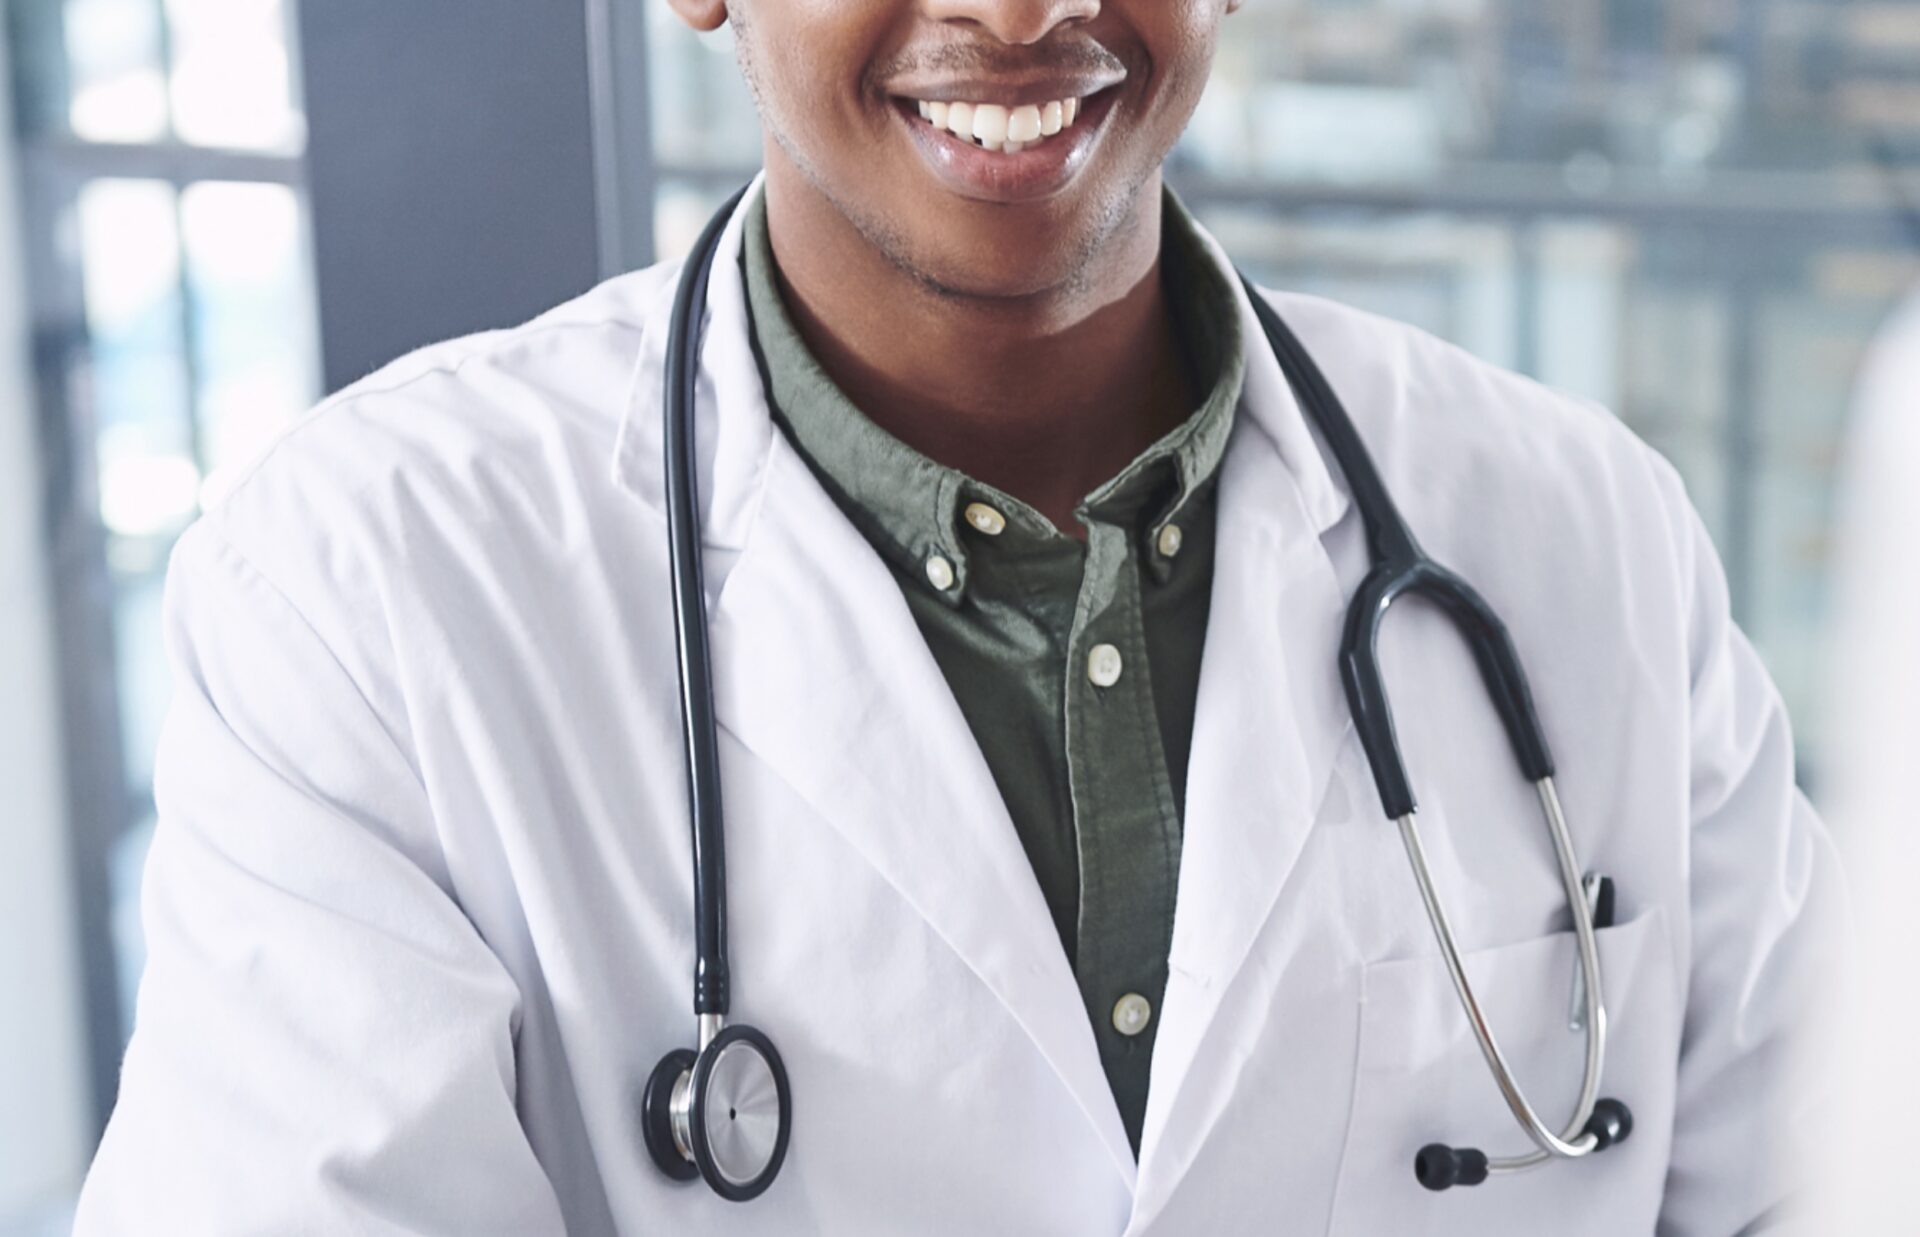 22-Year-Old Becomes One of Ghana’s Youngest Medical Doctors